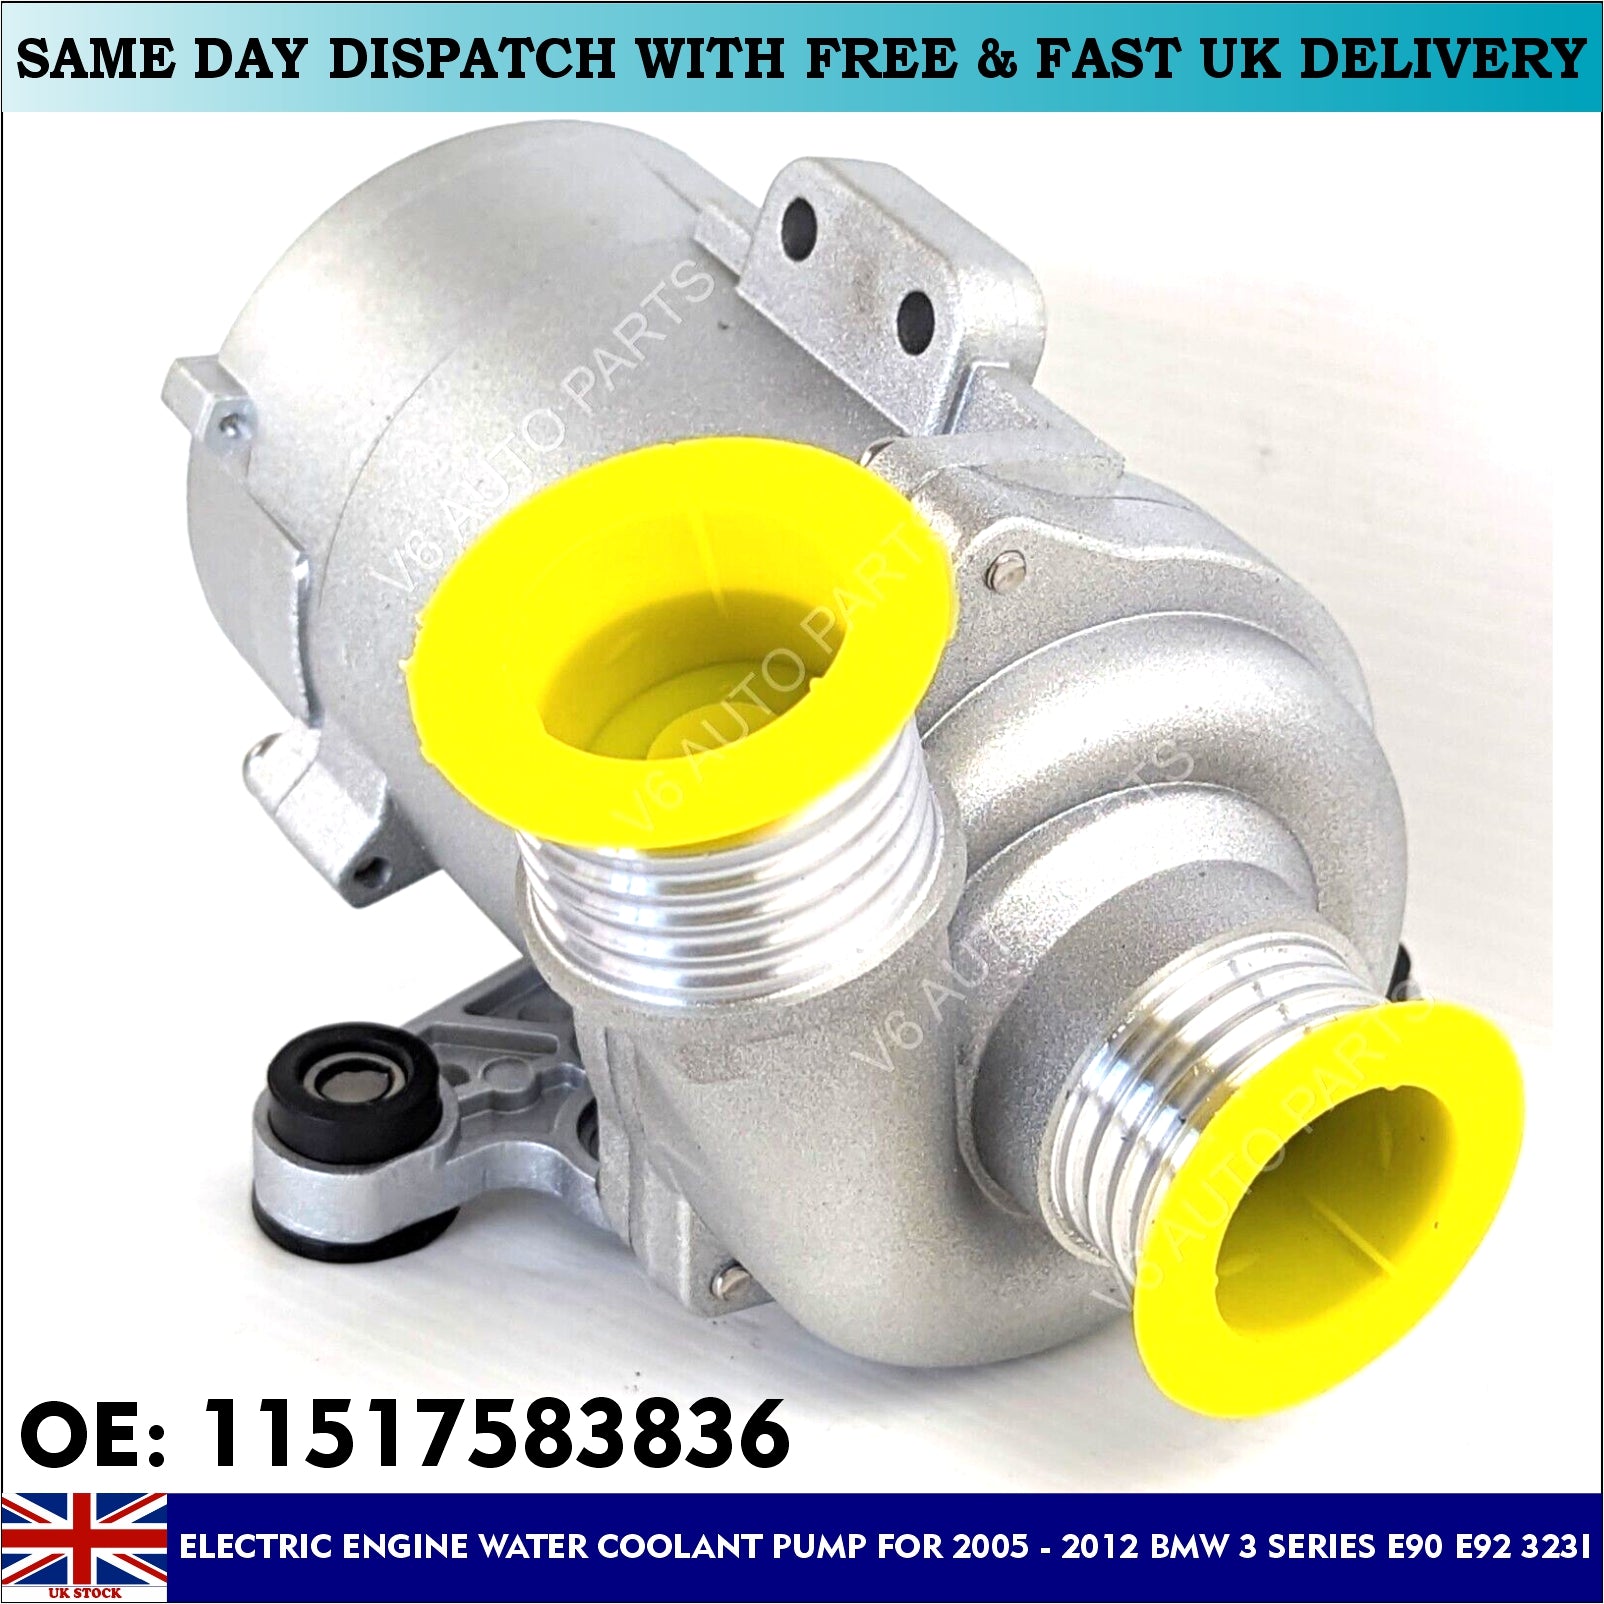 11517583836 Electromagnetic Engine Water Coolant Pump For 2004 - 2010 BMW 5 Series E60 523i